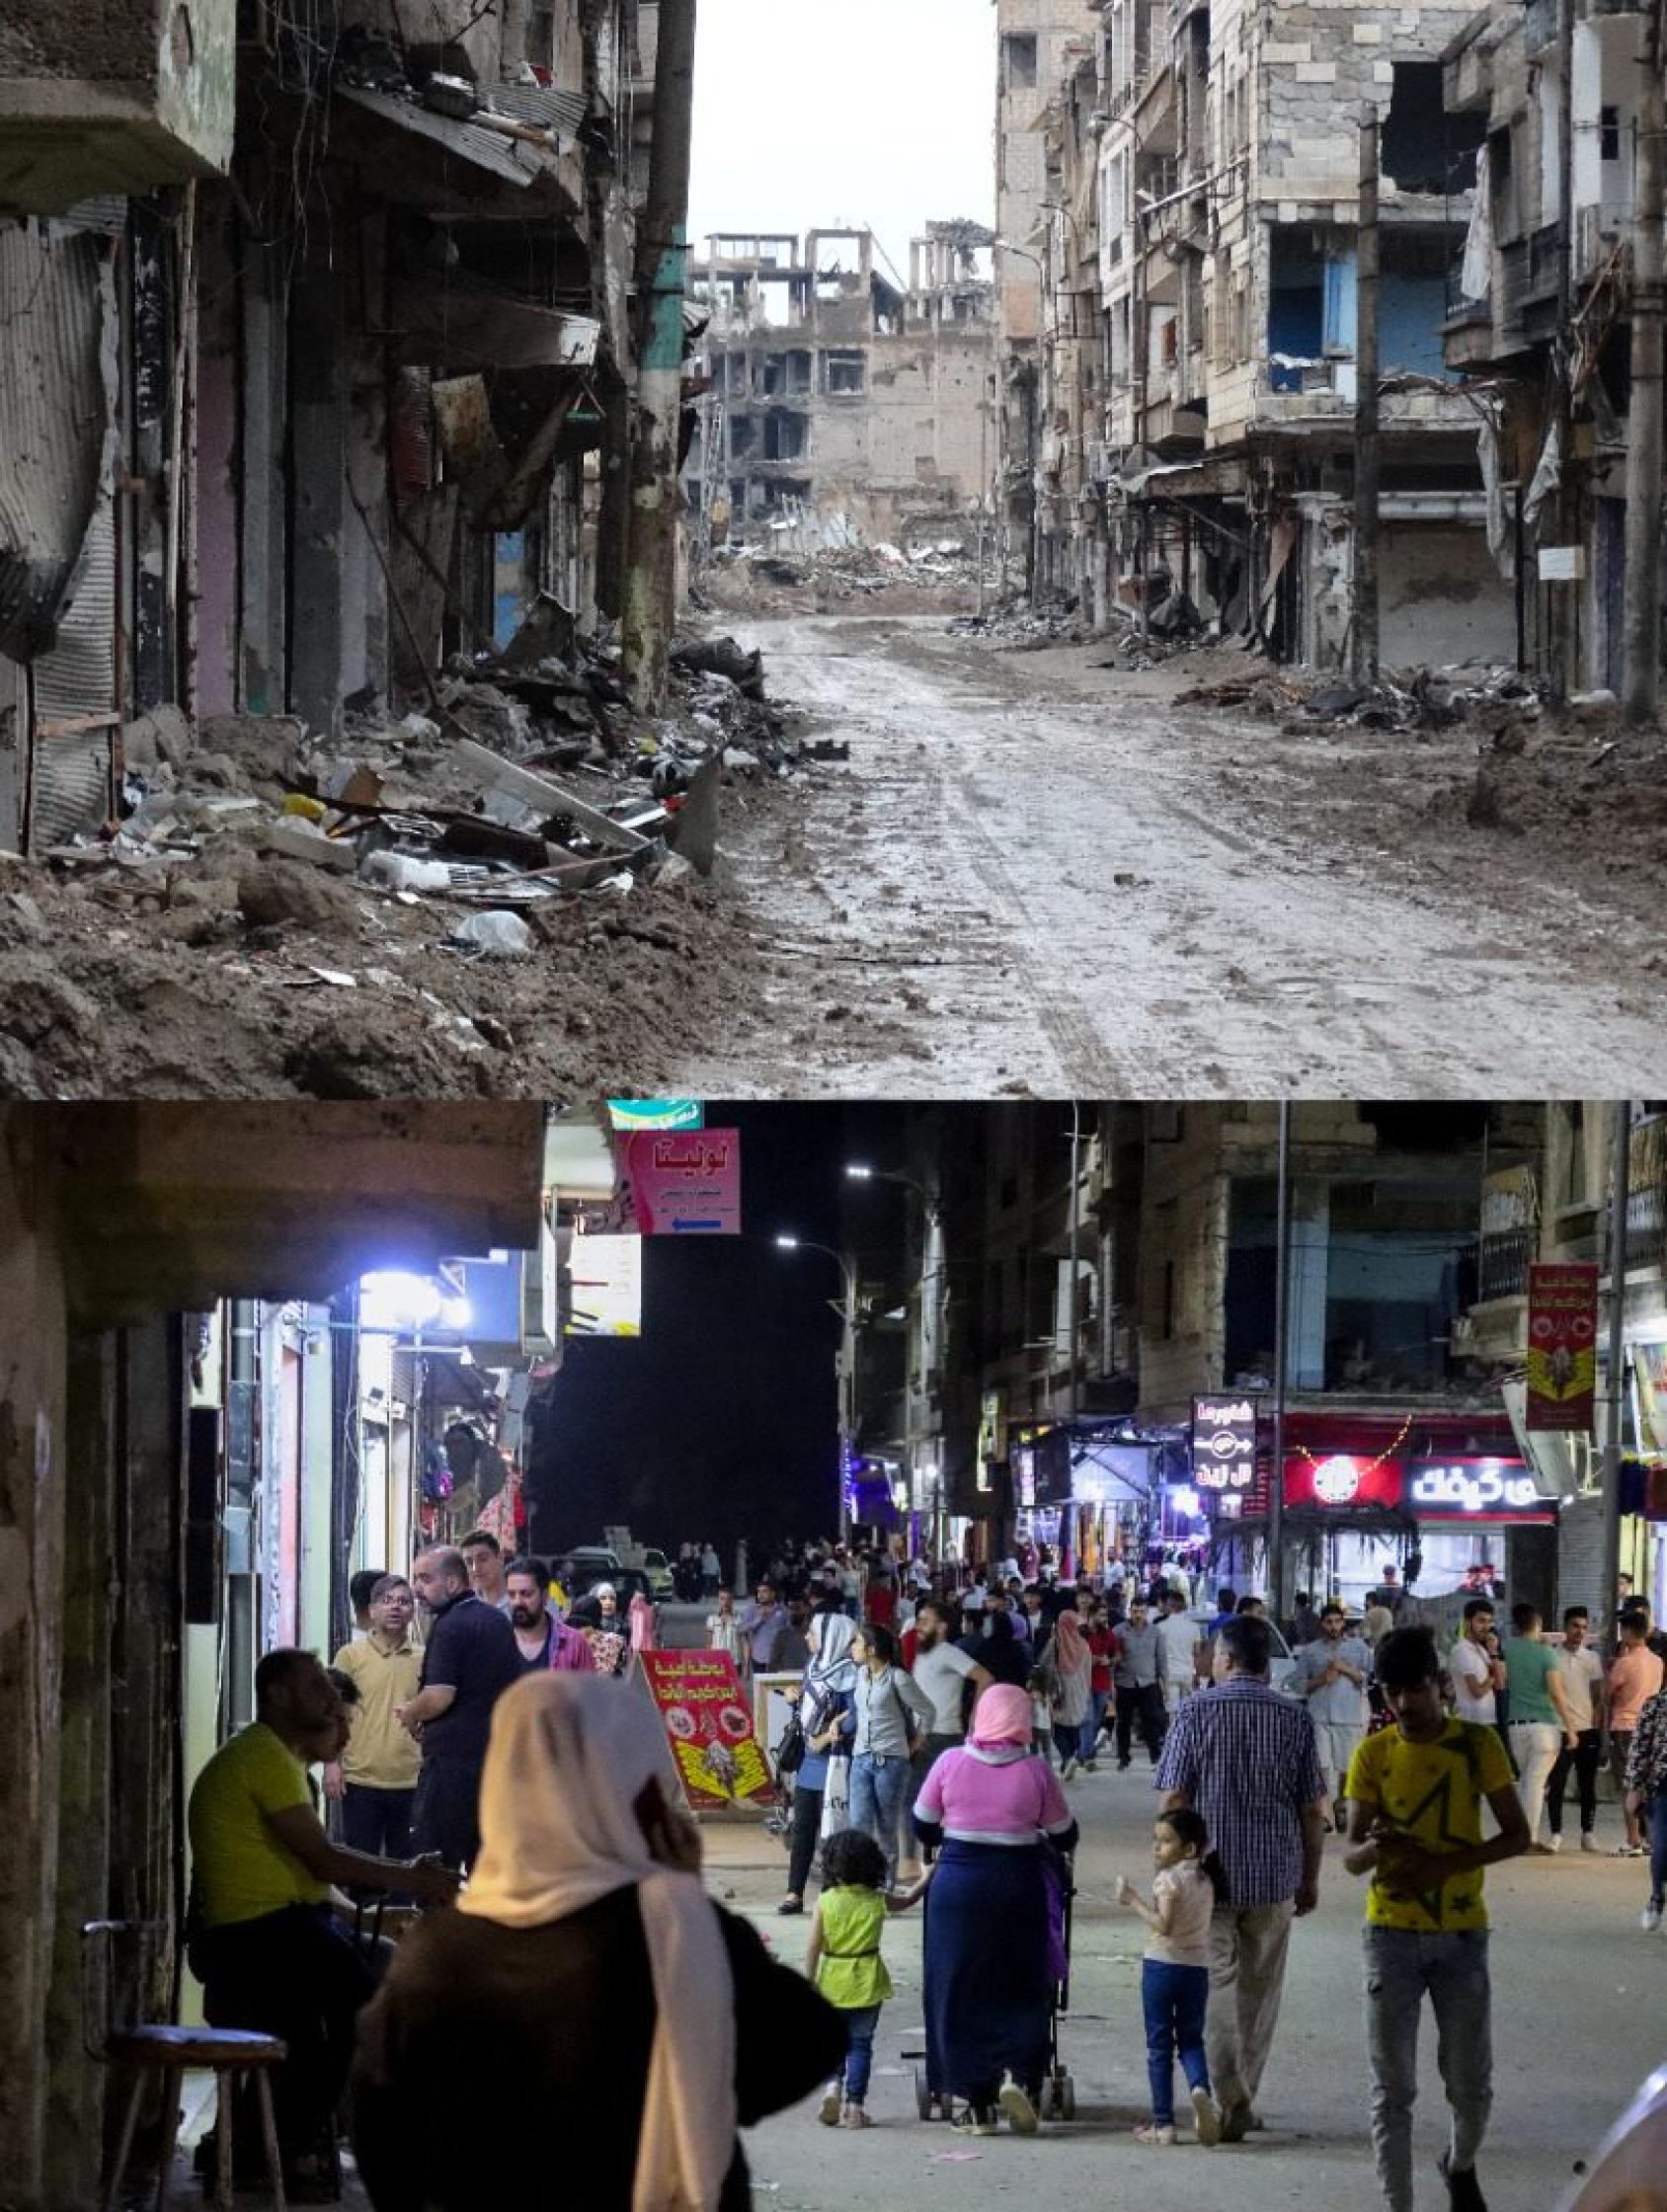 To the left: Cinema Fouad Street in central Deir Ezzor was heavily destroyed during the hostilities. To the right: After the interventions of the UN Joint Programme on Urban and Rural Resilience, businesses have reopened, and life has started to return to Cinema Fouad Street. 